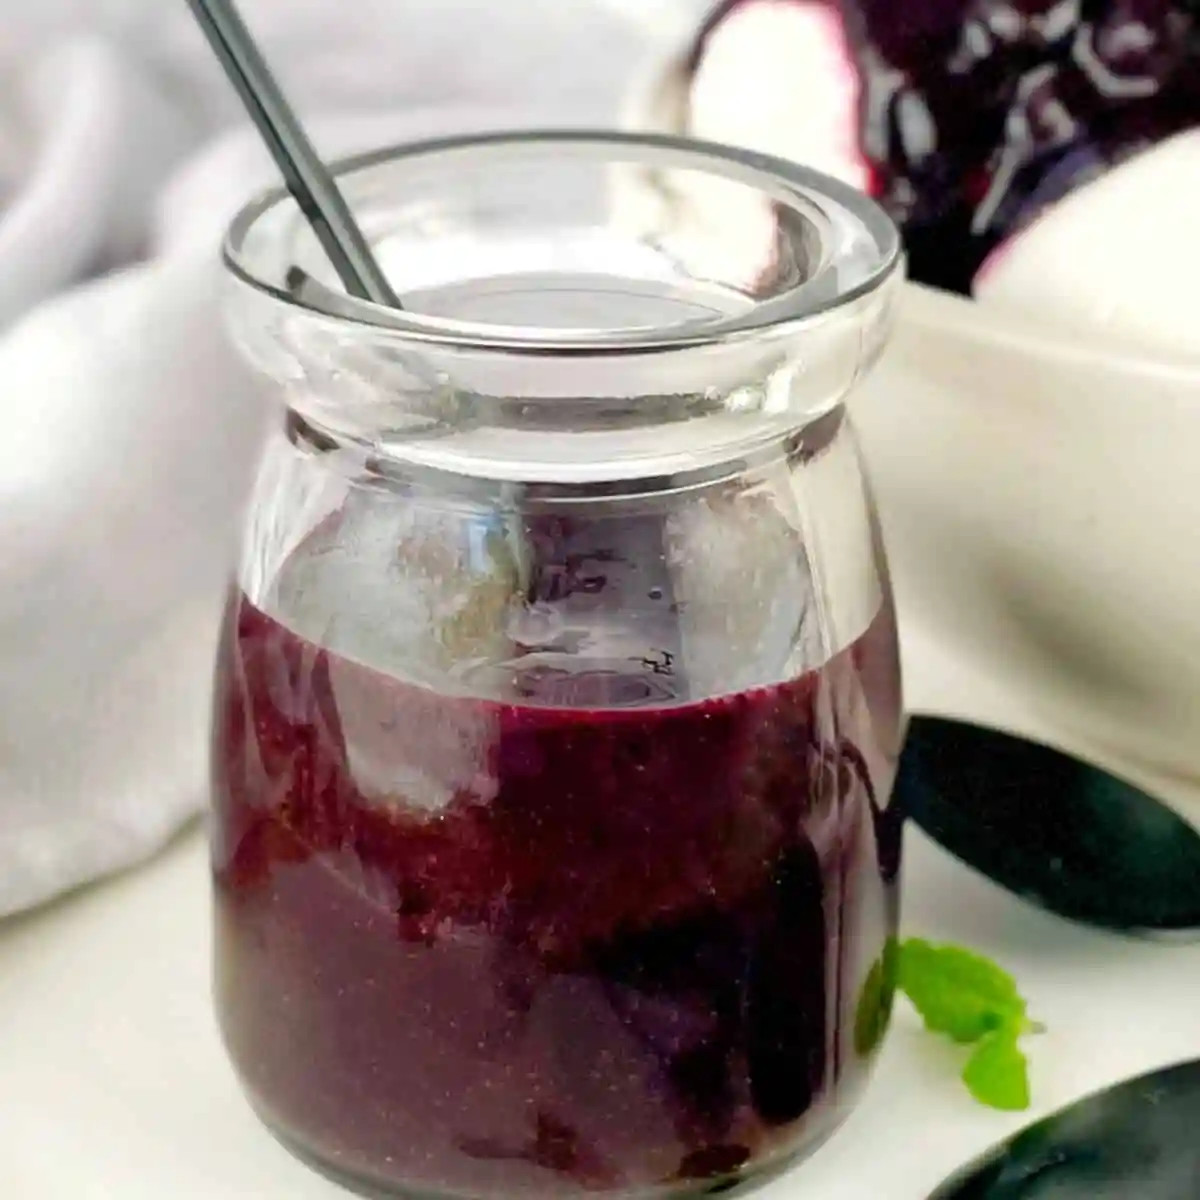 Blueberry coulis in a glass jar.